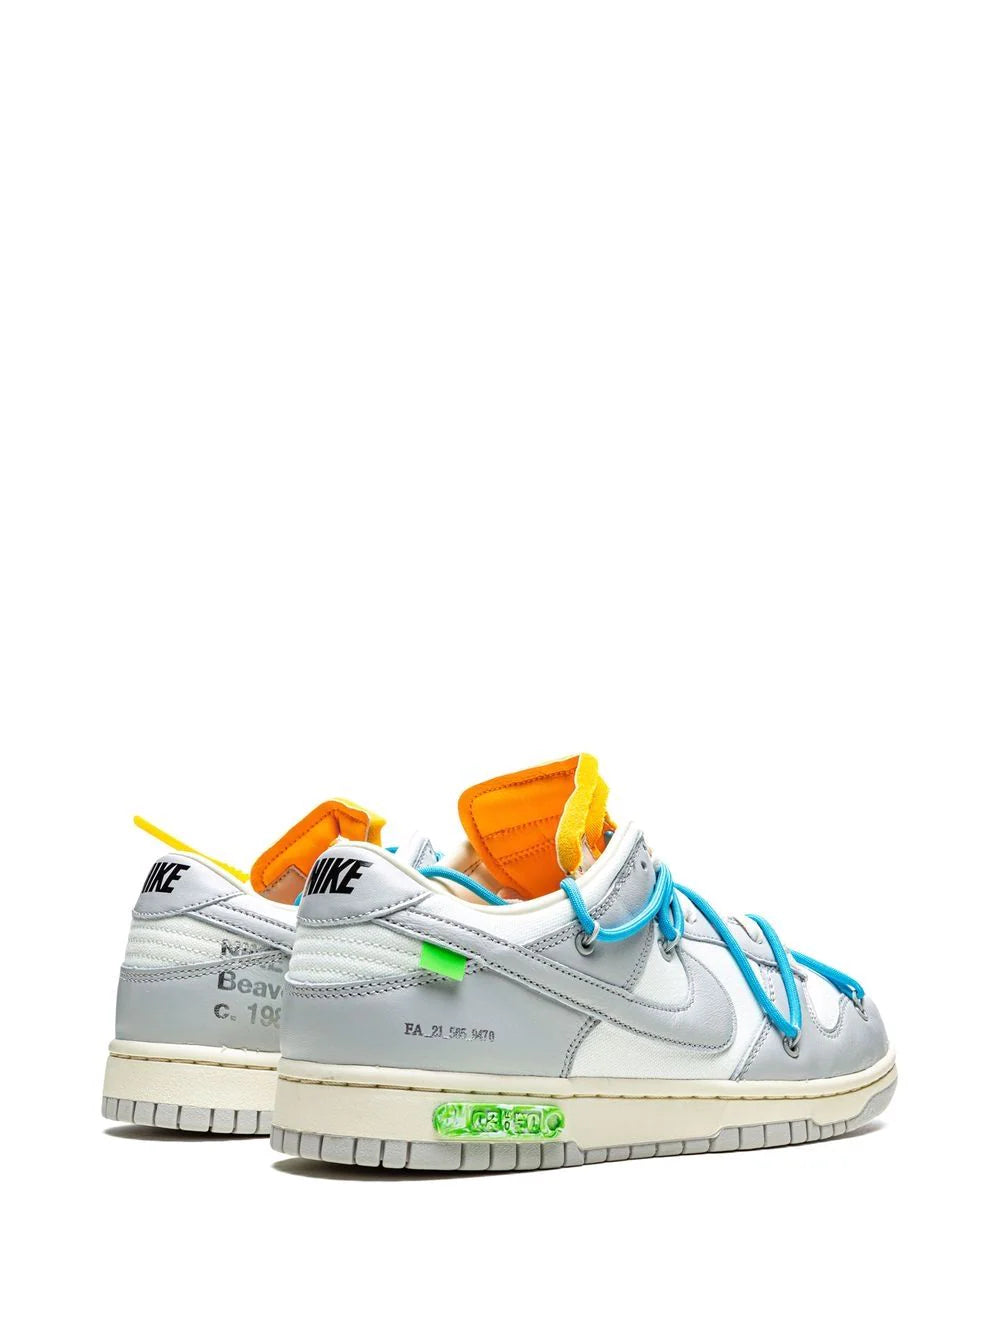 Nike x Offwhite Dunk Low Lot 02